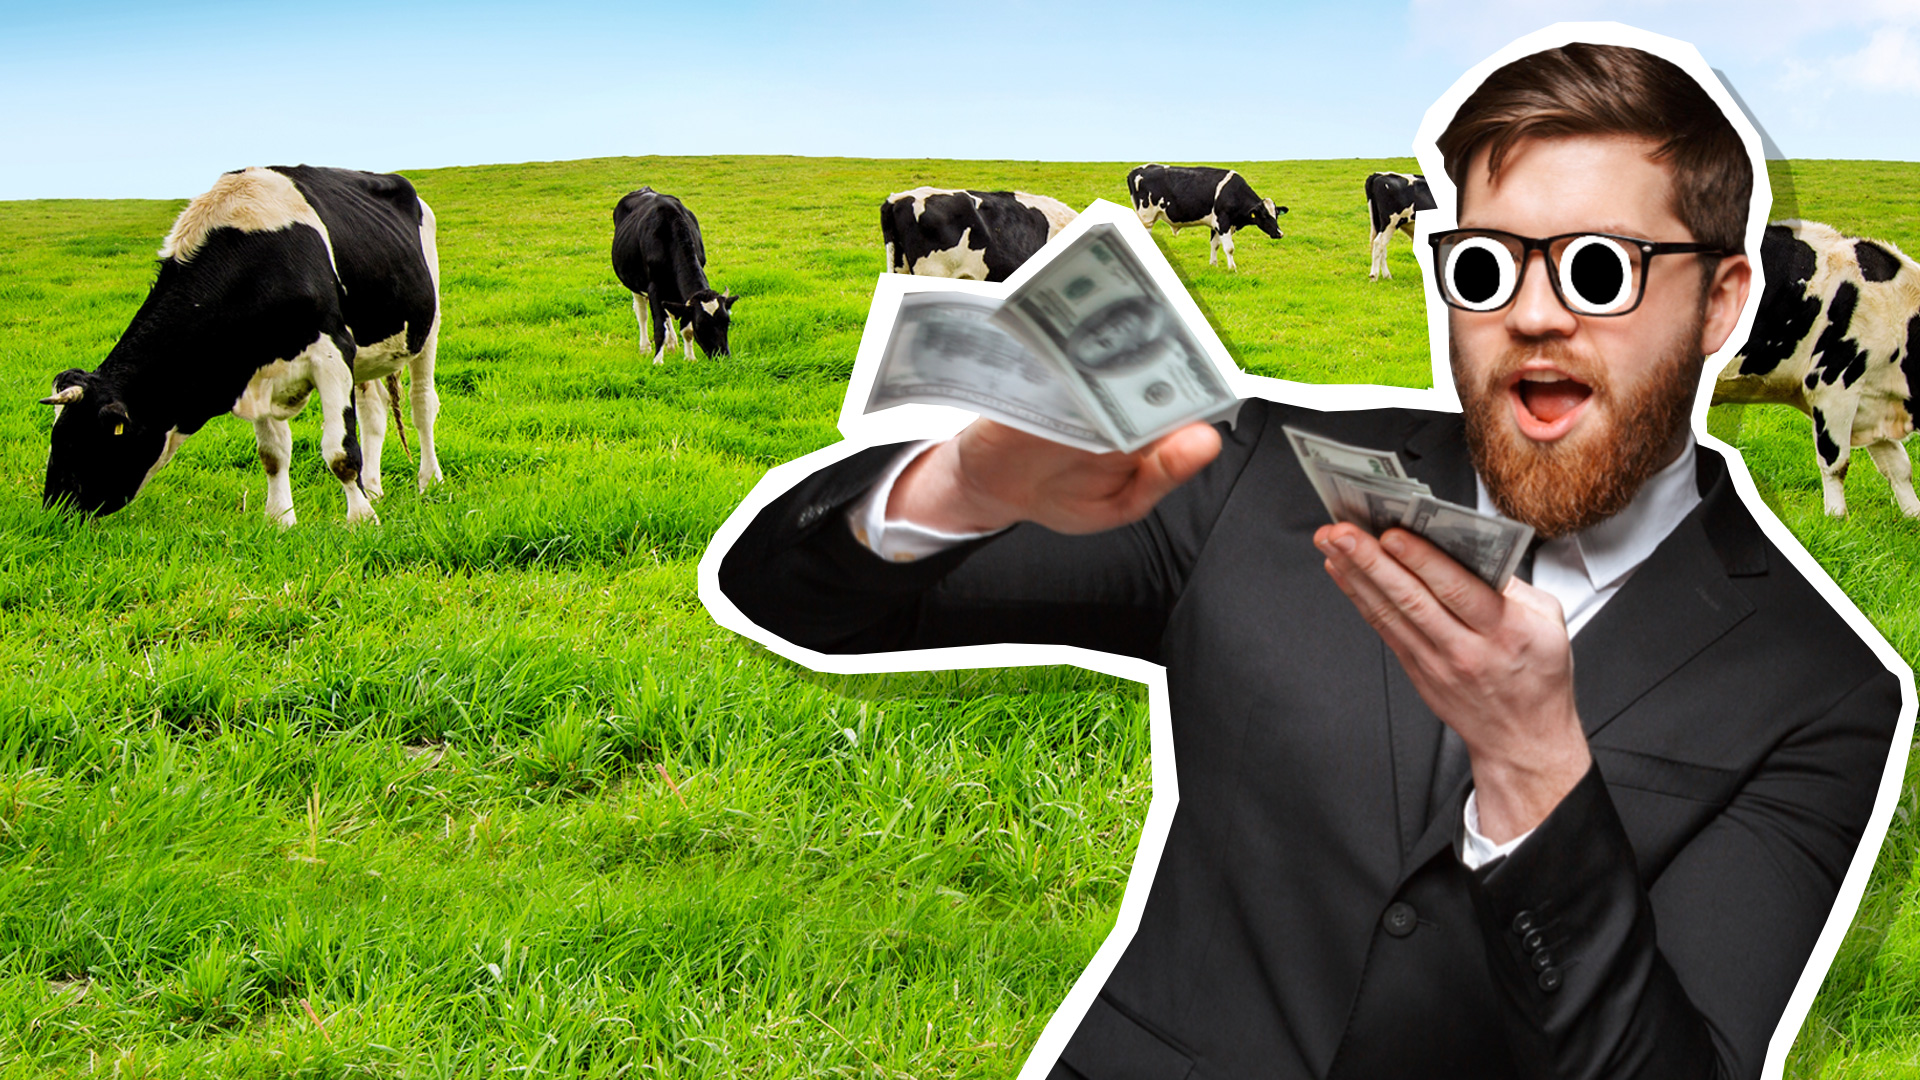 A man counting money in a field of cows